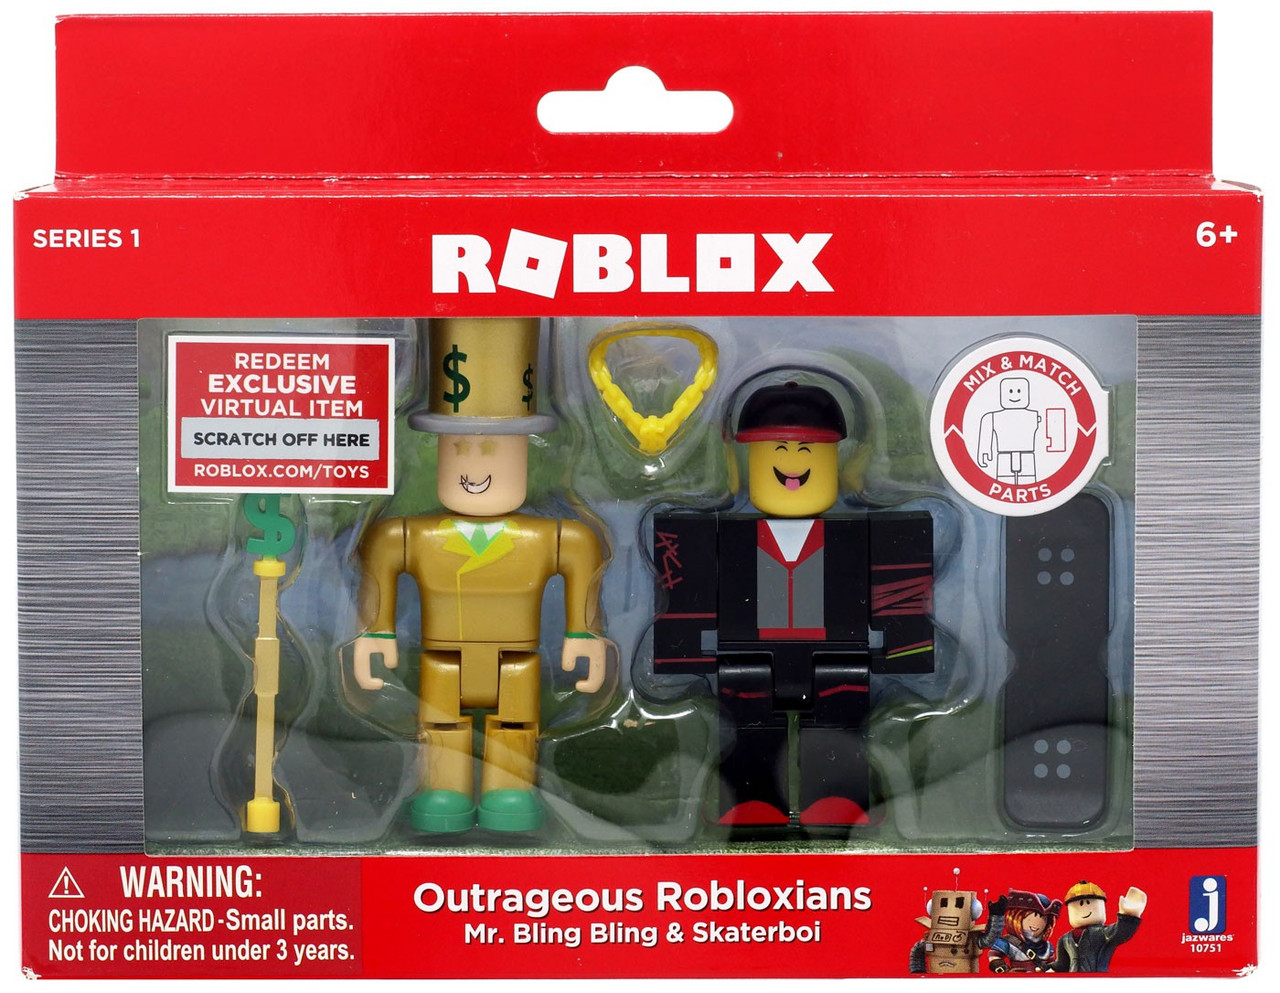 Roblox Outrageous Robloxians Mr Bling Bling Skaterboi 3 Action Figure 2 Pack Jazwares Toywiz - toys hobbies 2018 roblox figures game legends of roblox action